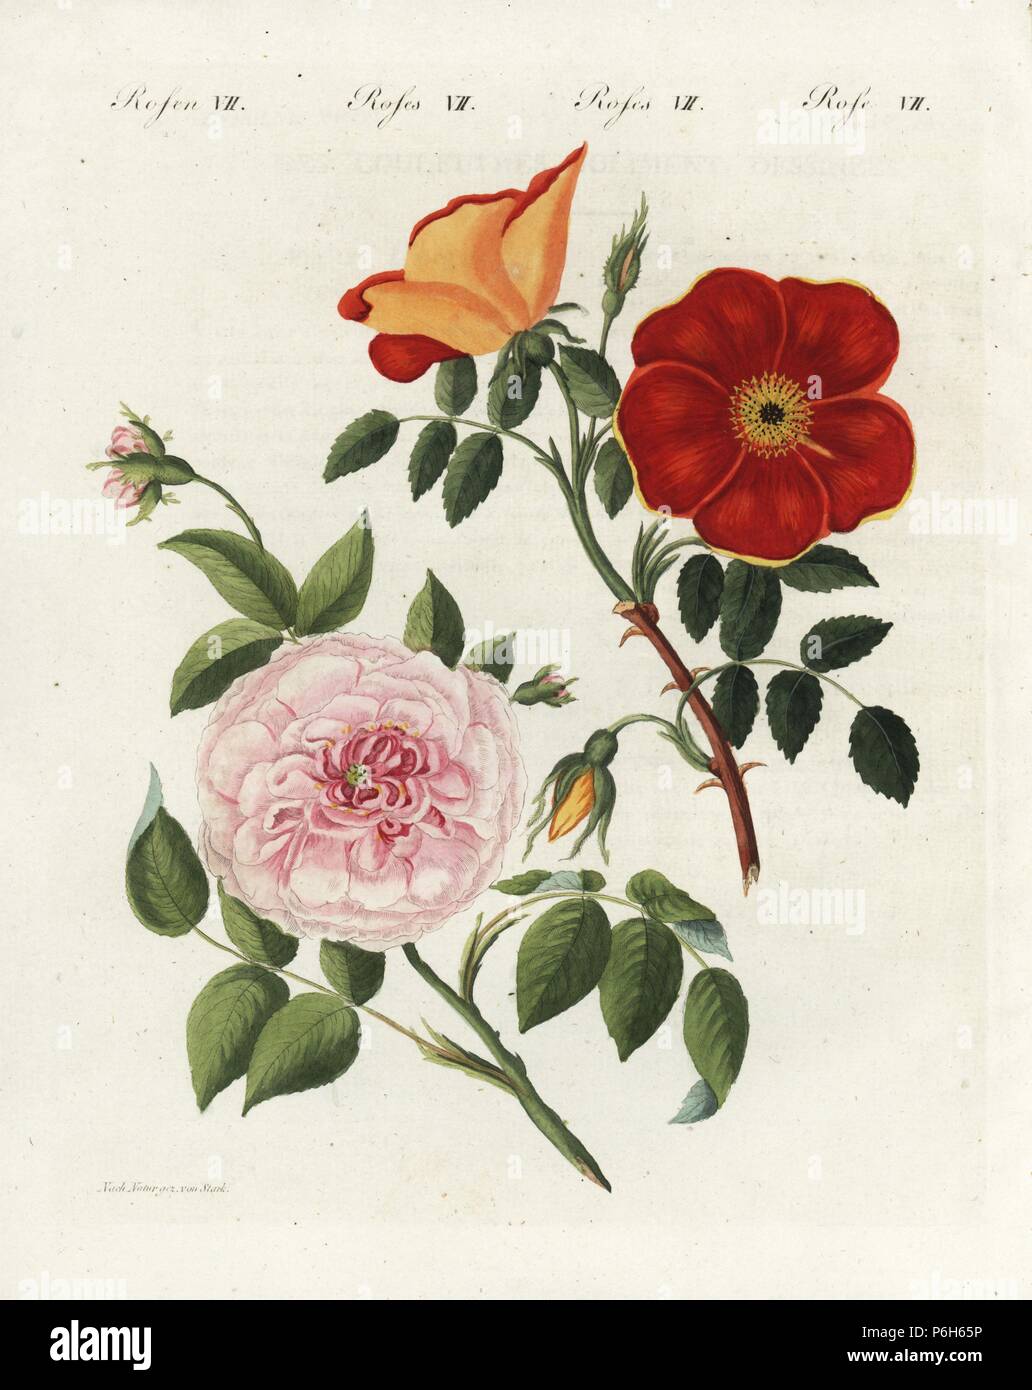 Austrian copper rose, Rosa punicea, and white virgin rose, Rosa truncata virginalis. Handcoloured copperplate engraving from an illustration drawn from nature by Stark from Friedrich Johann Bertuch's 'Bilderbuch fur Kinder' (Picture Book for Children), Weimar, 1802. Stock Photo